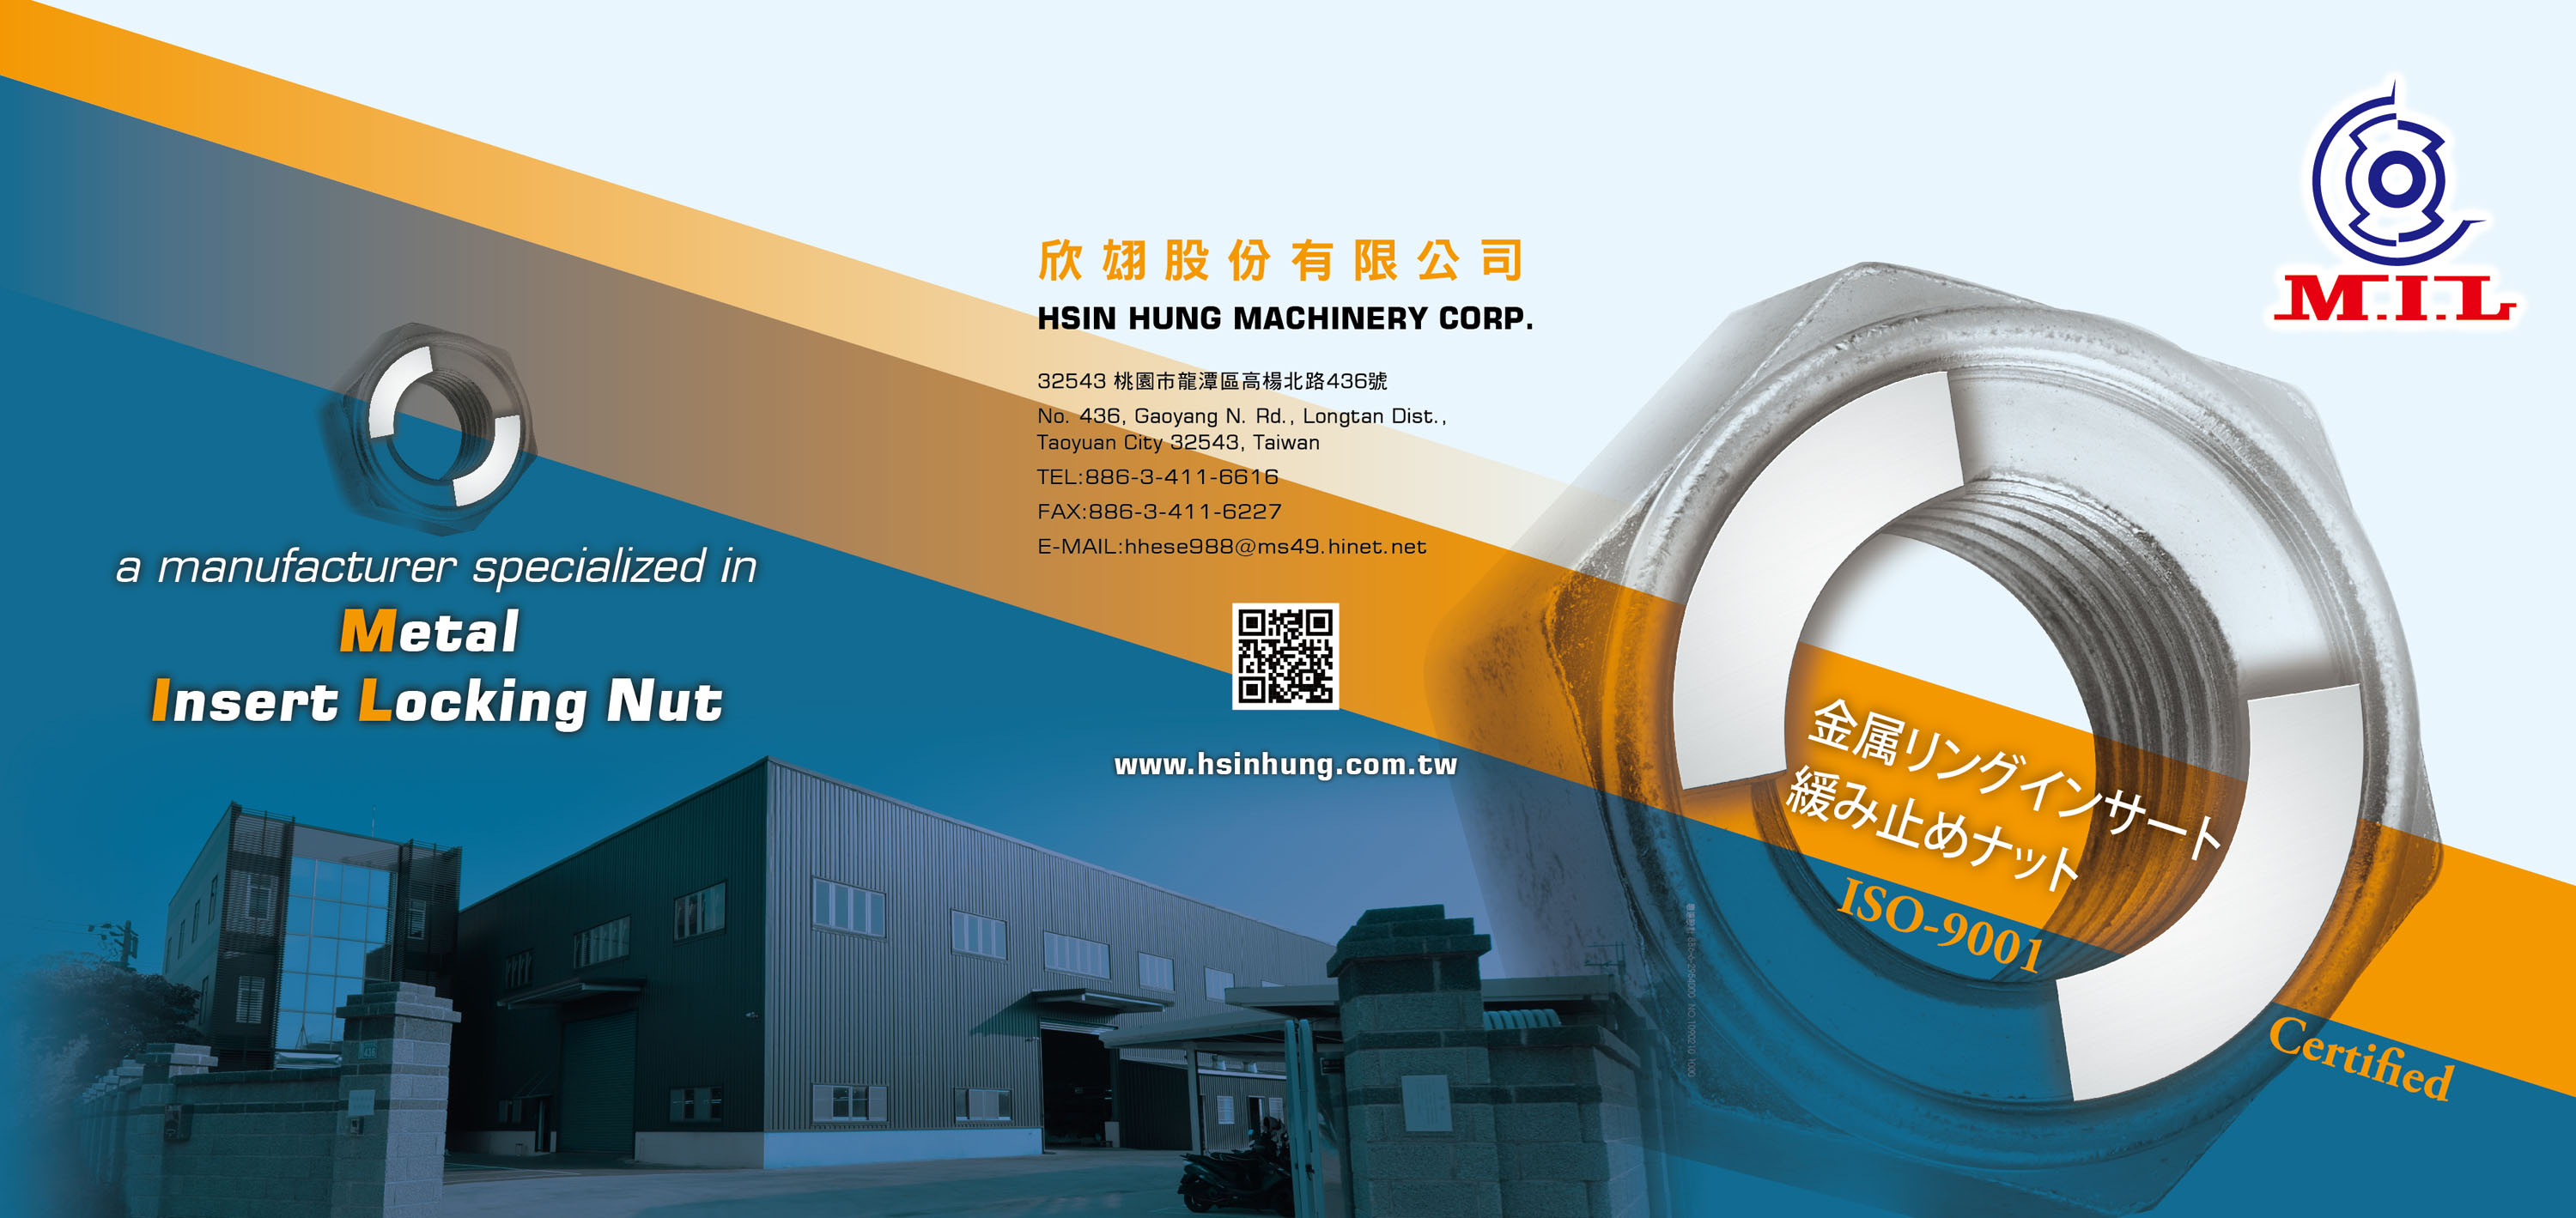 HSIN HUNG MACHINERY CORP.  Online Catalogues